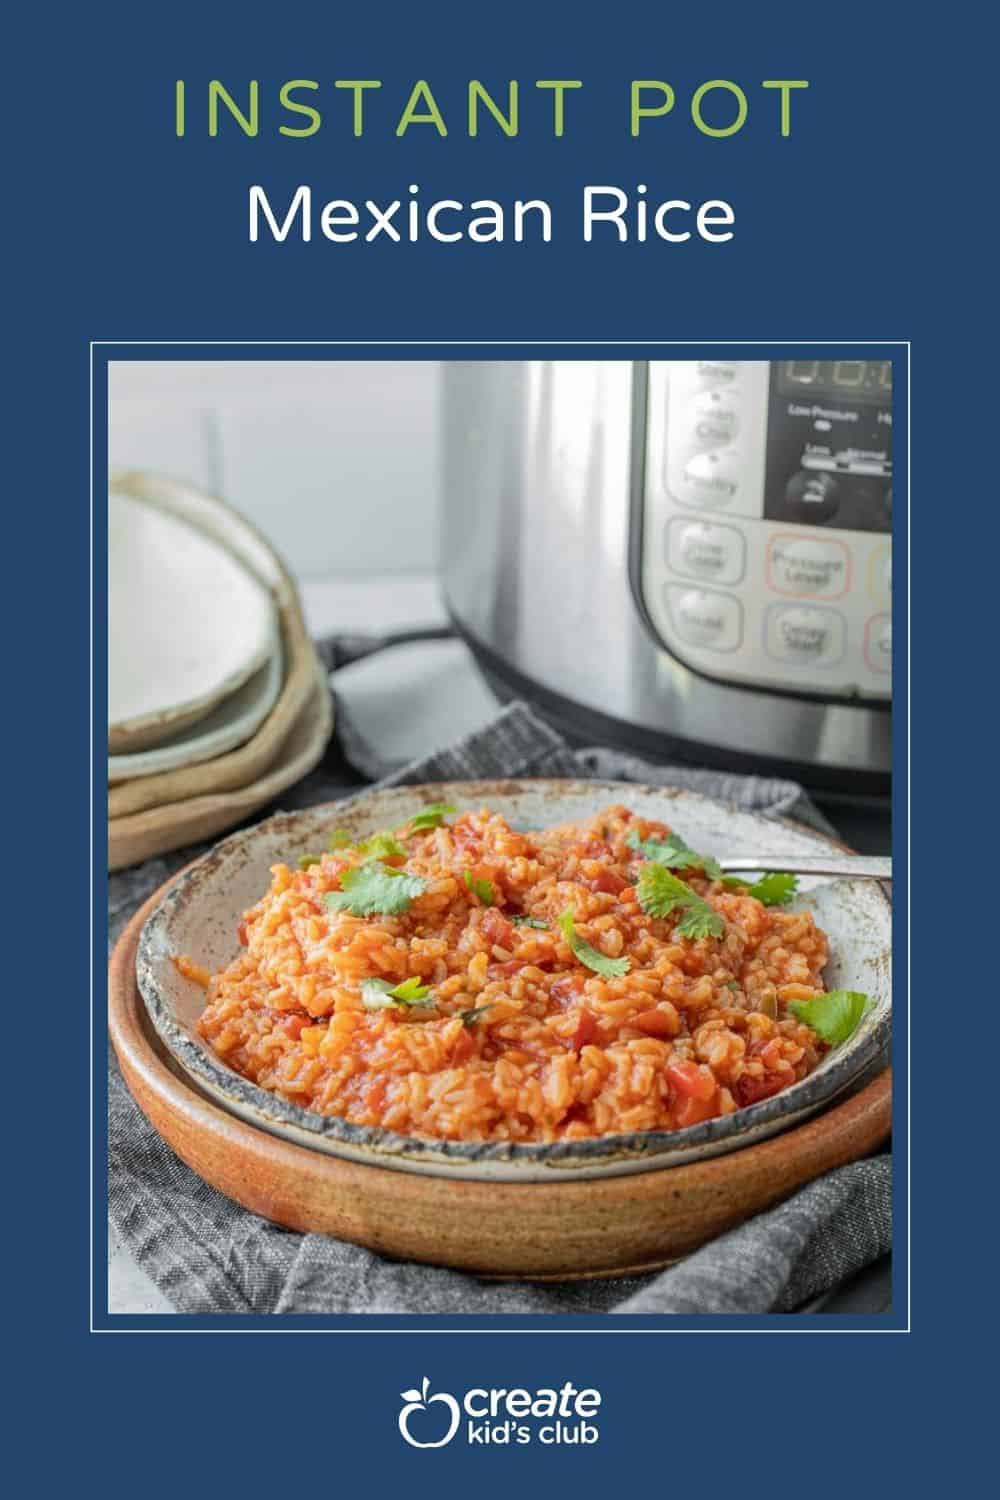 Pin of instant pot Mexican rice in a bowl.